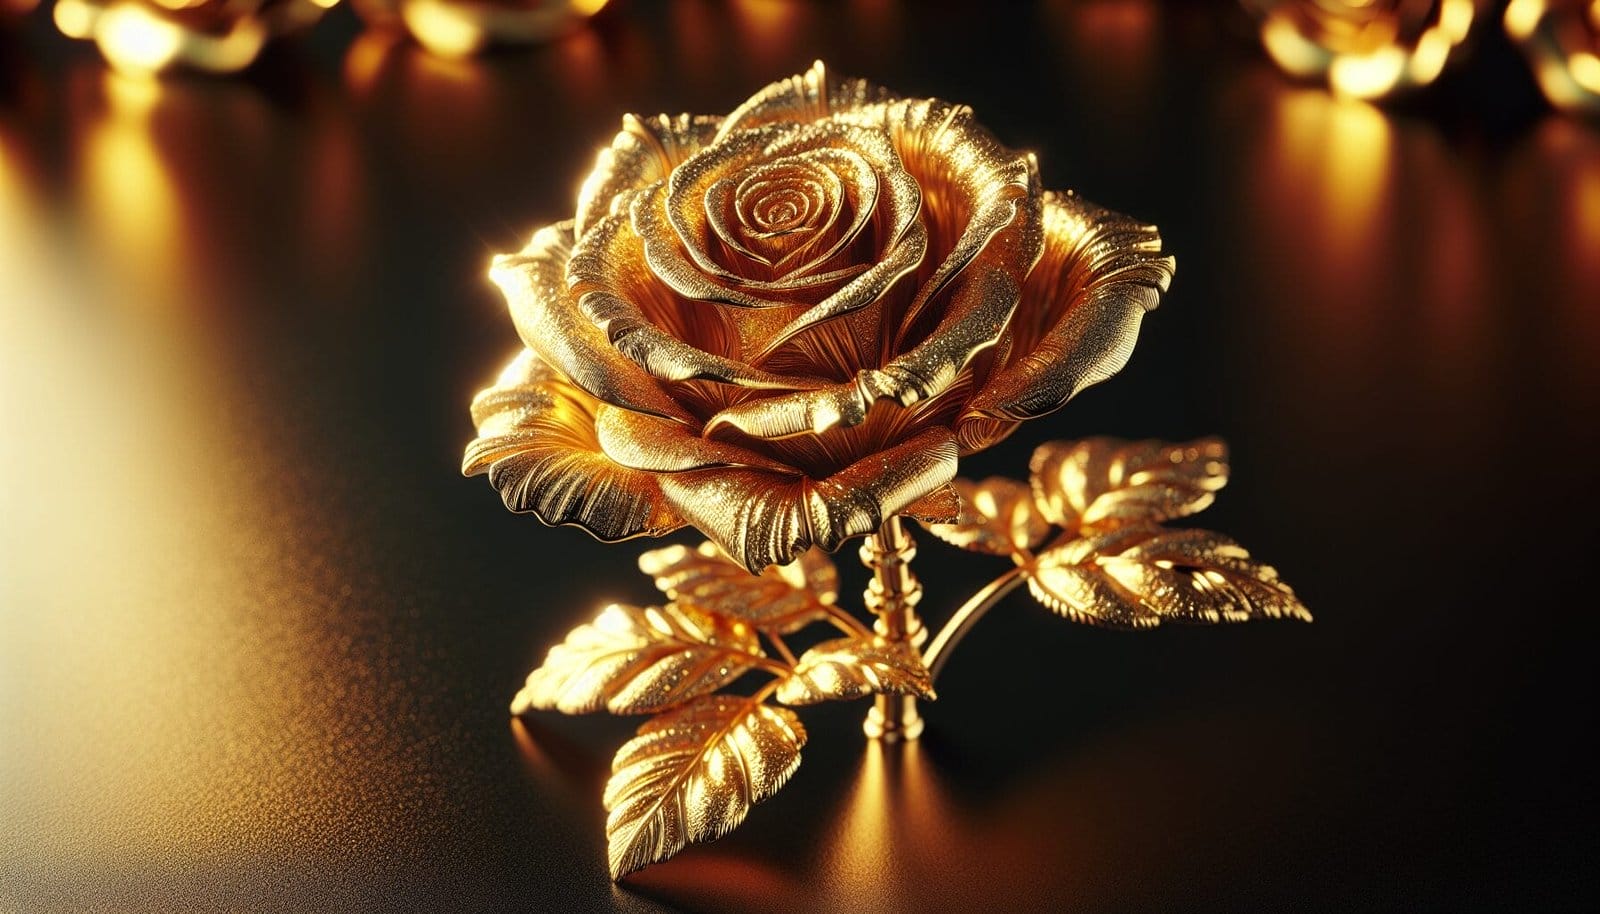 You are currently viewing Top Unique Gift Ideas: 24k Gold Rose for Your Special Someone